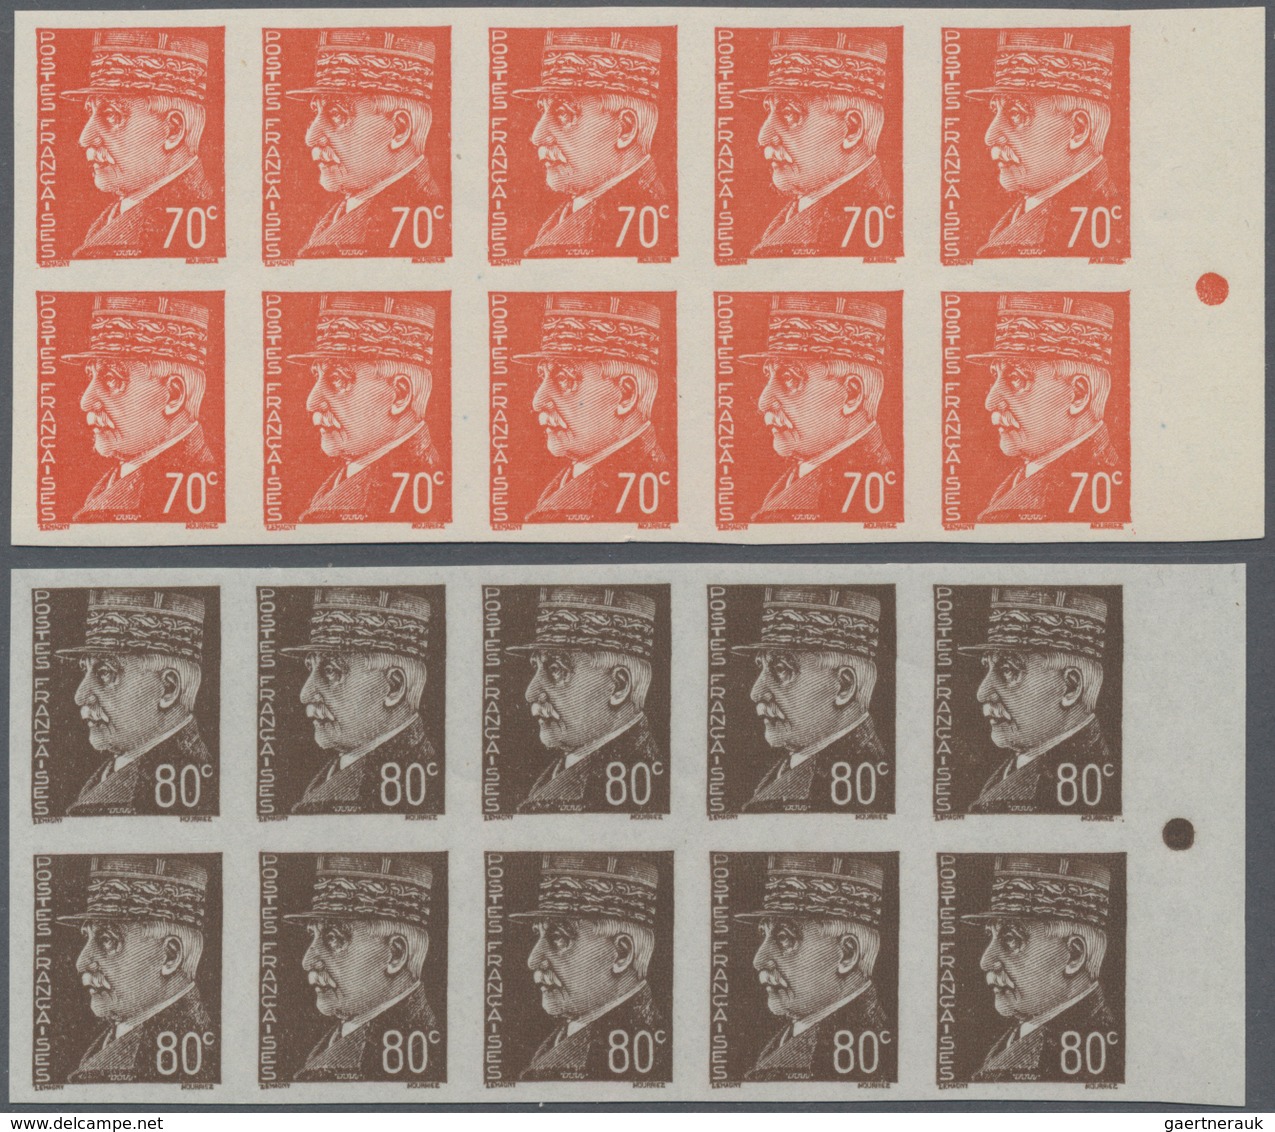 Frankreich: 1941/1942, definitive issue Marshall Petain complete set of 22 in IMPERFORATE blocks of